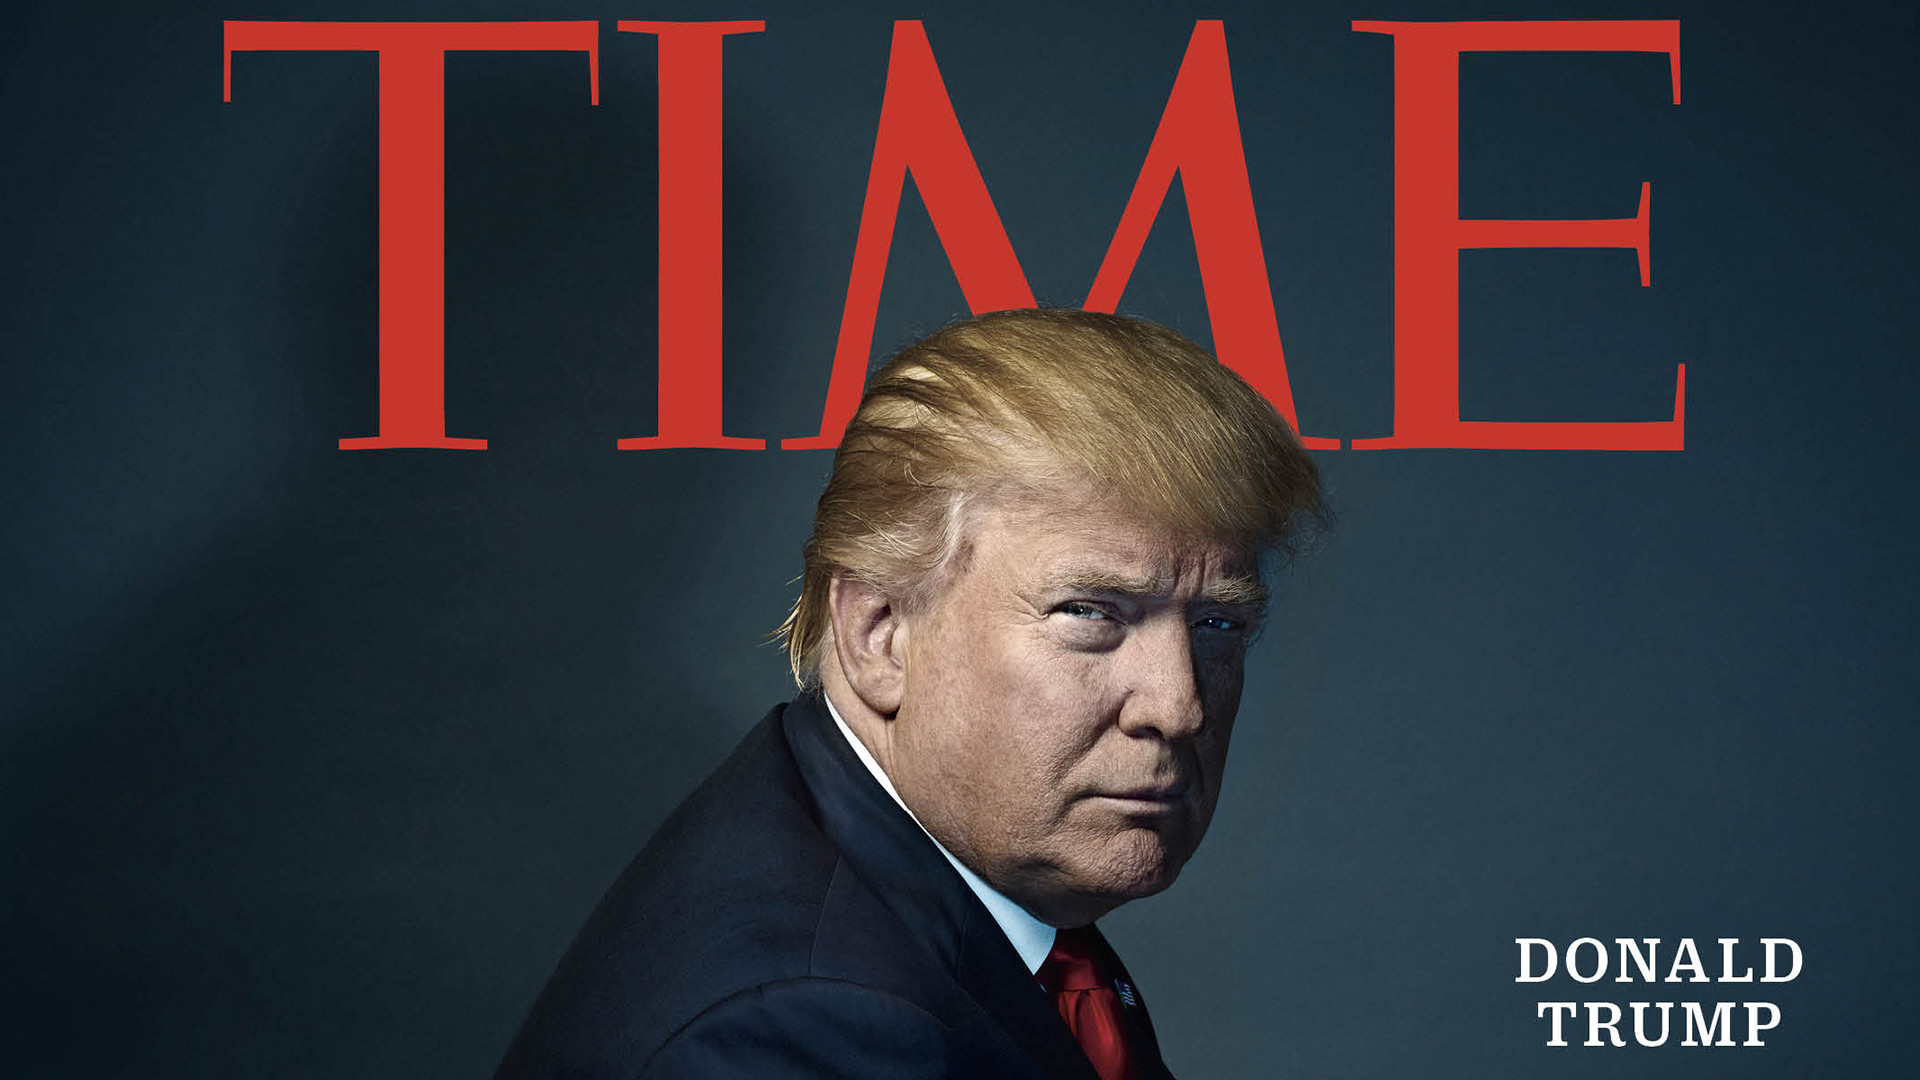 1920x1080 President-elect Donald Trump is TIME Person of the Year for 2016 - TODAY.com